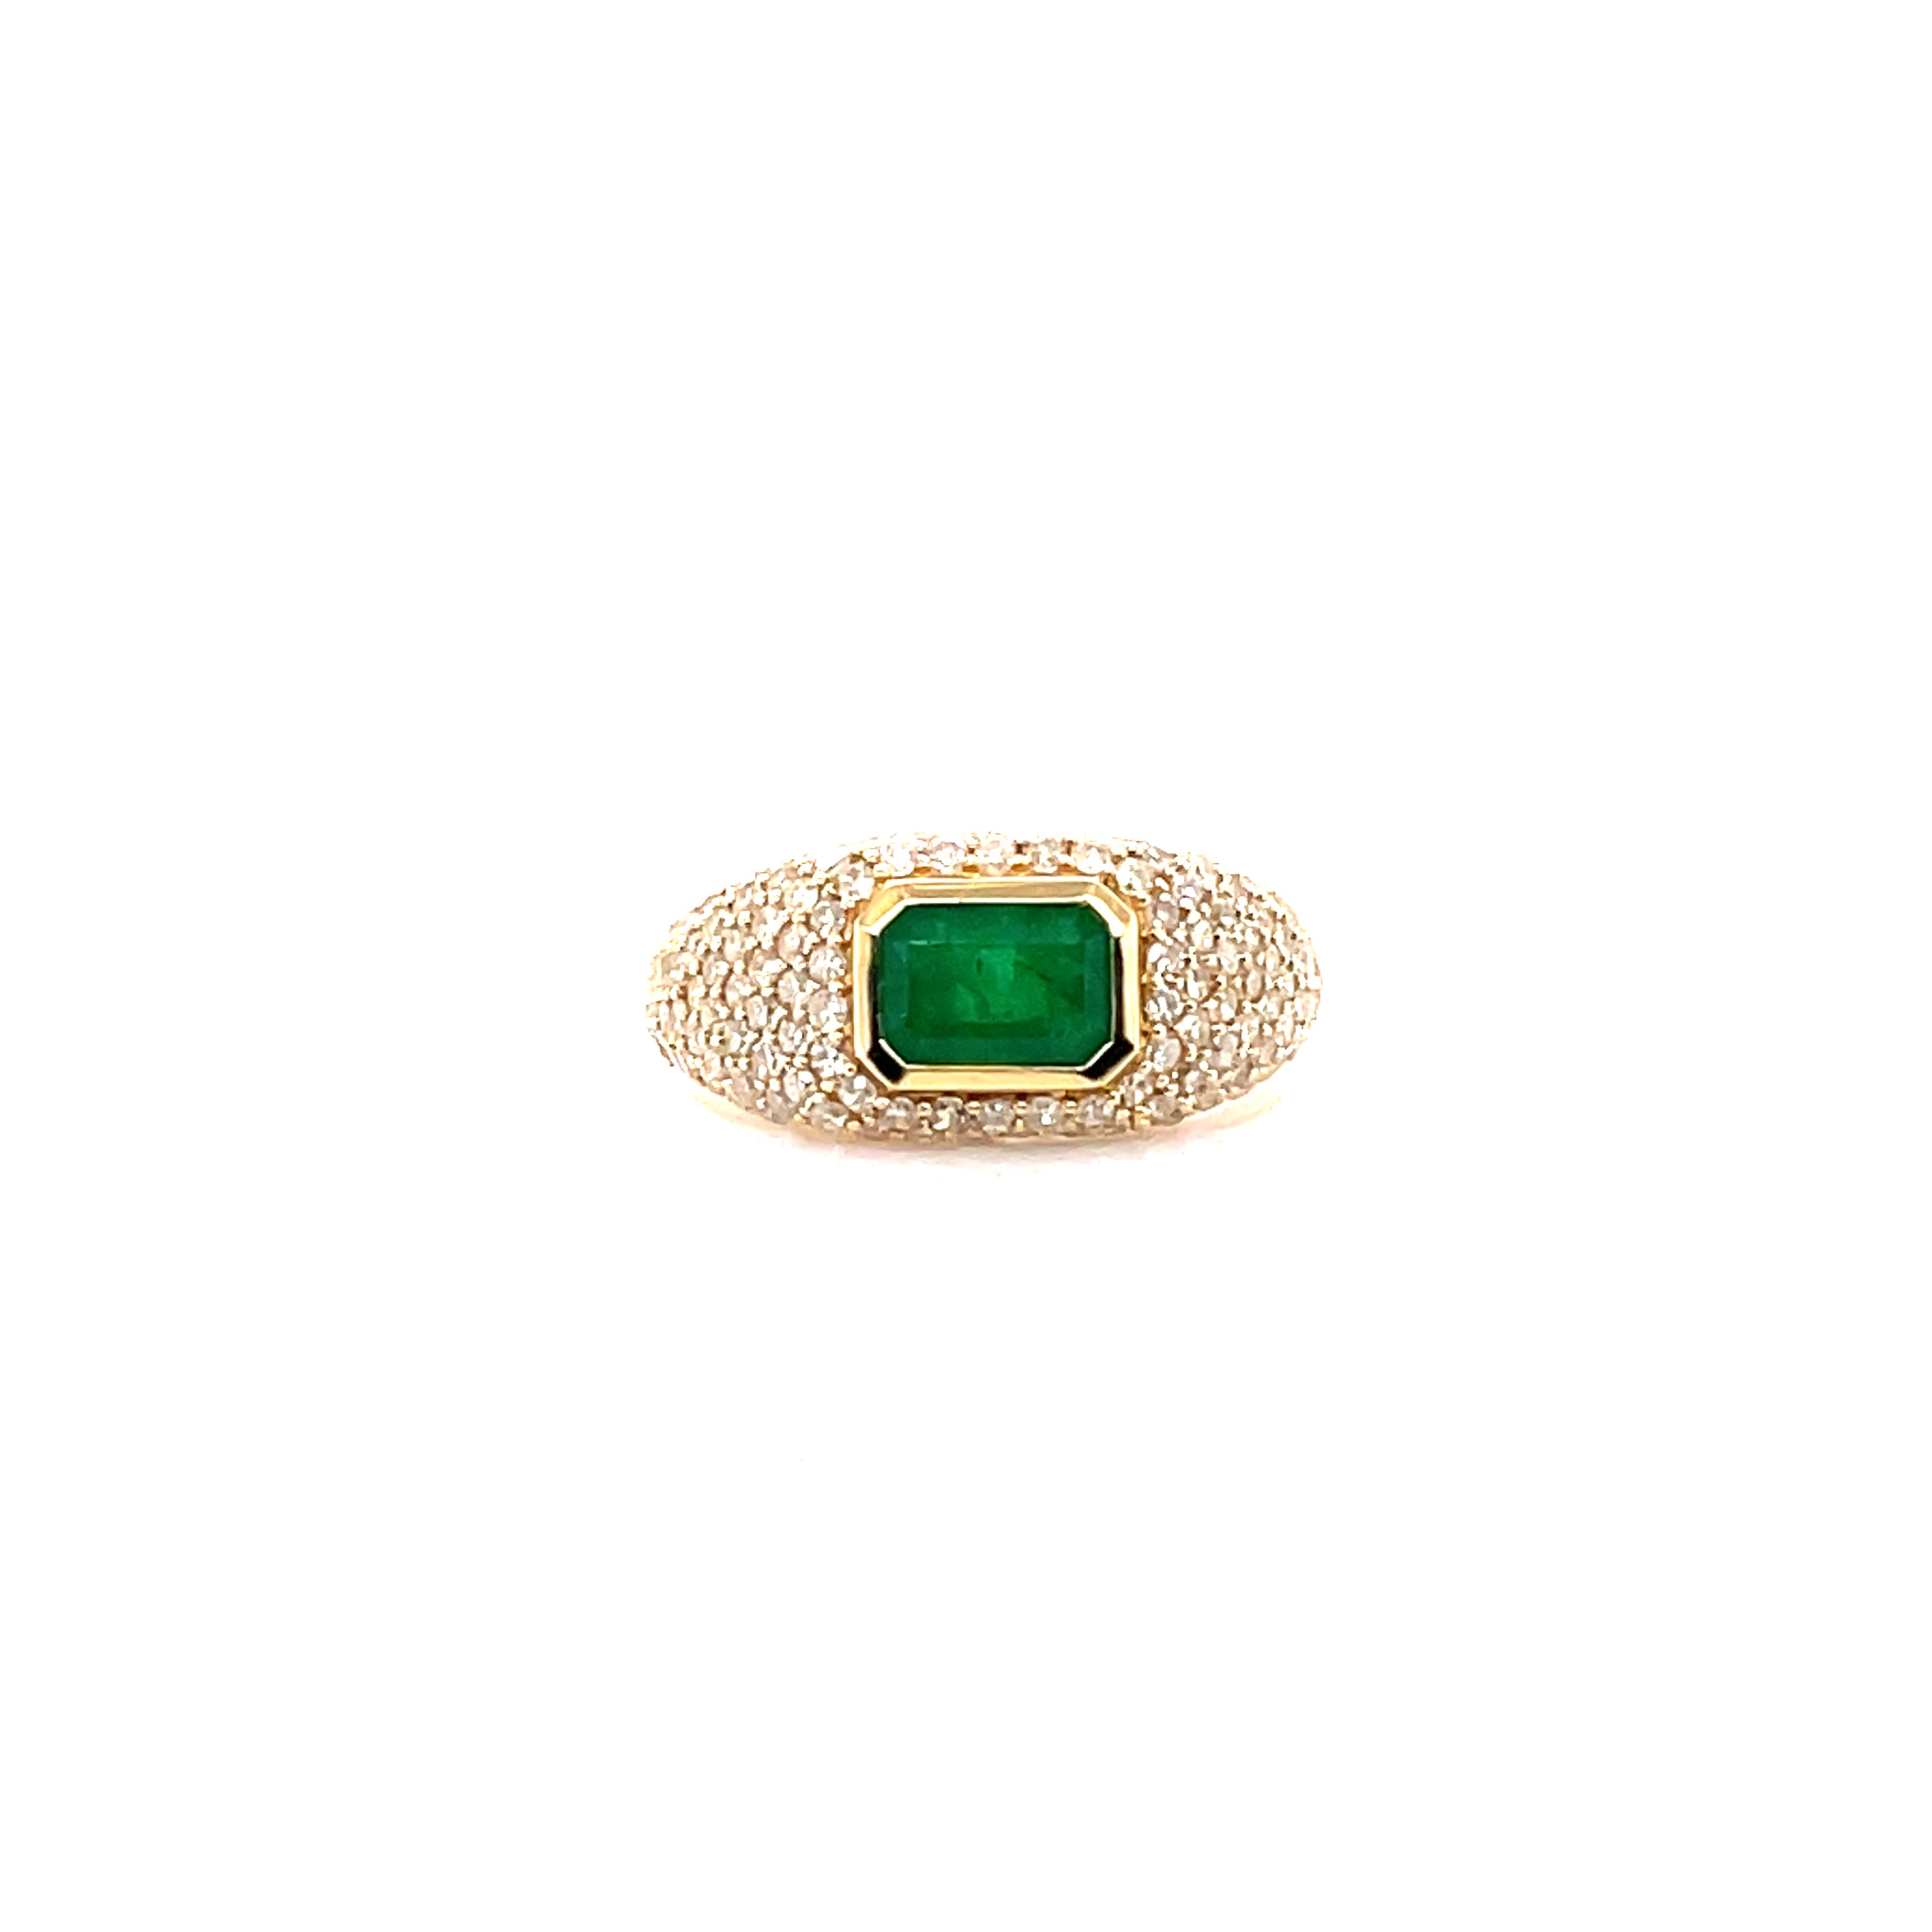 The Royal Signet Ring Emerald